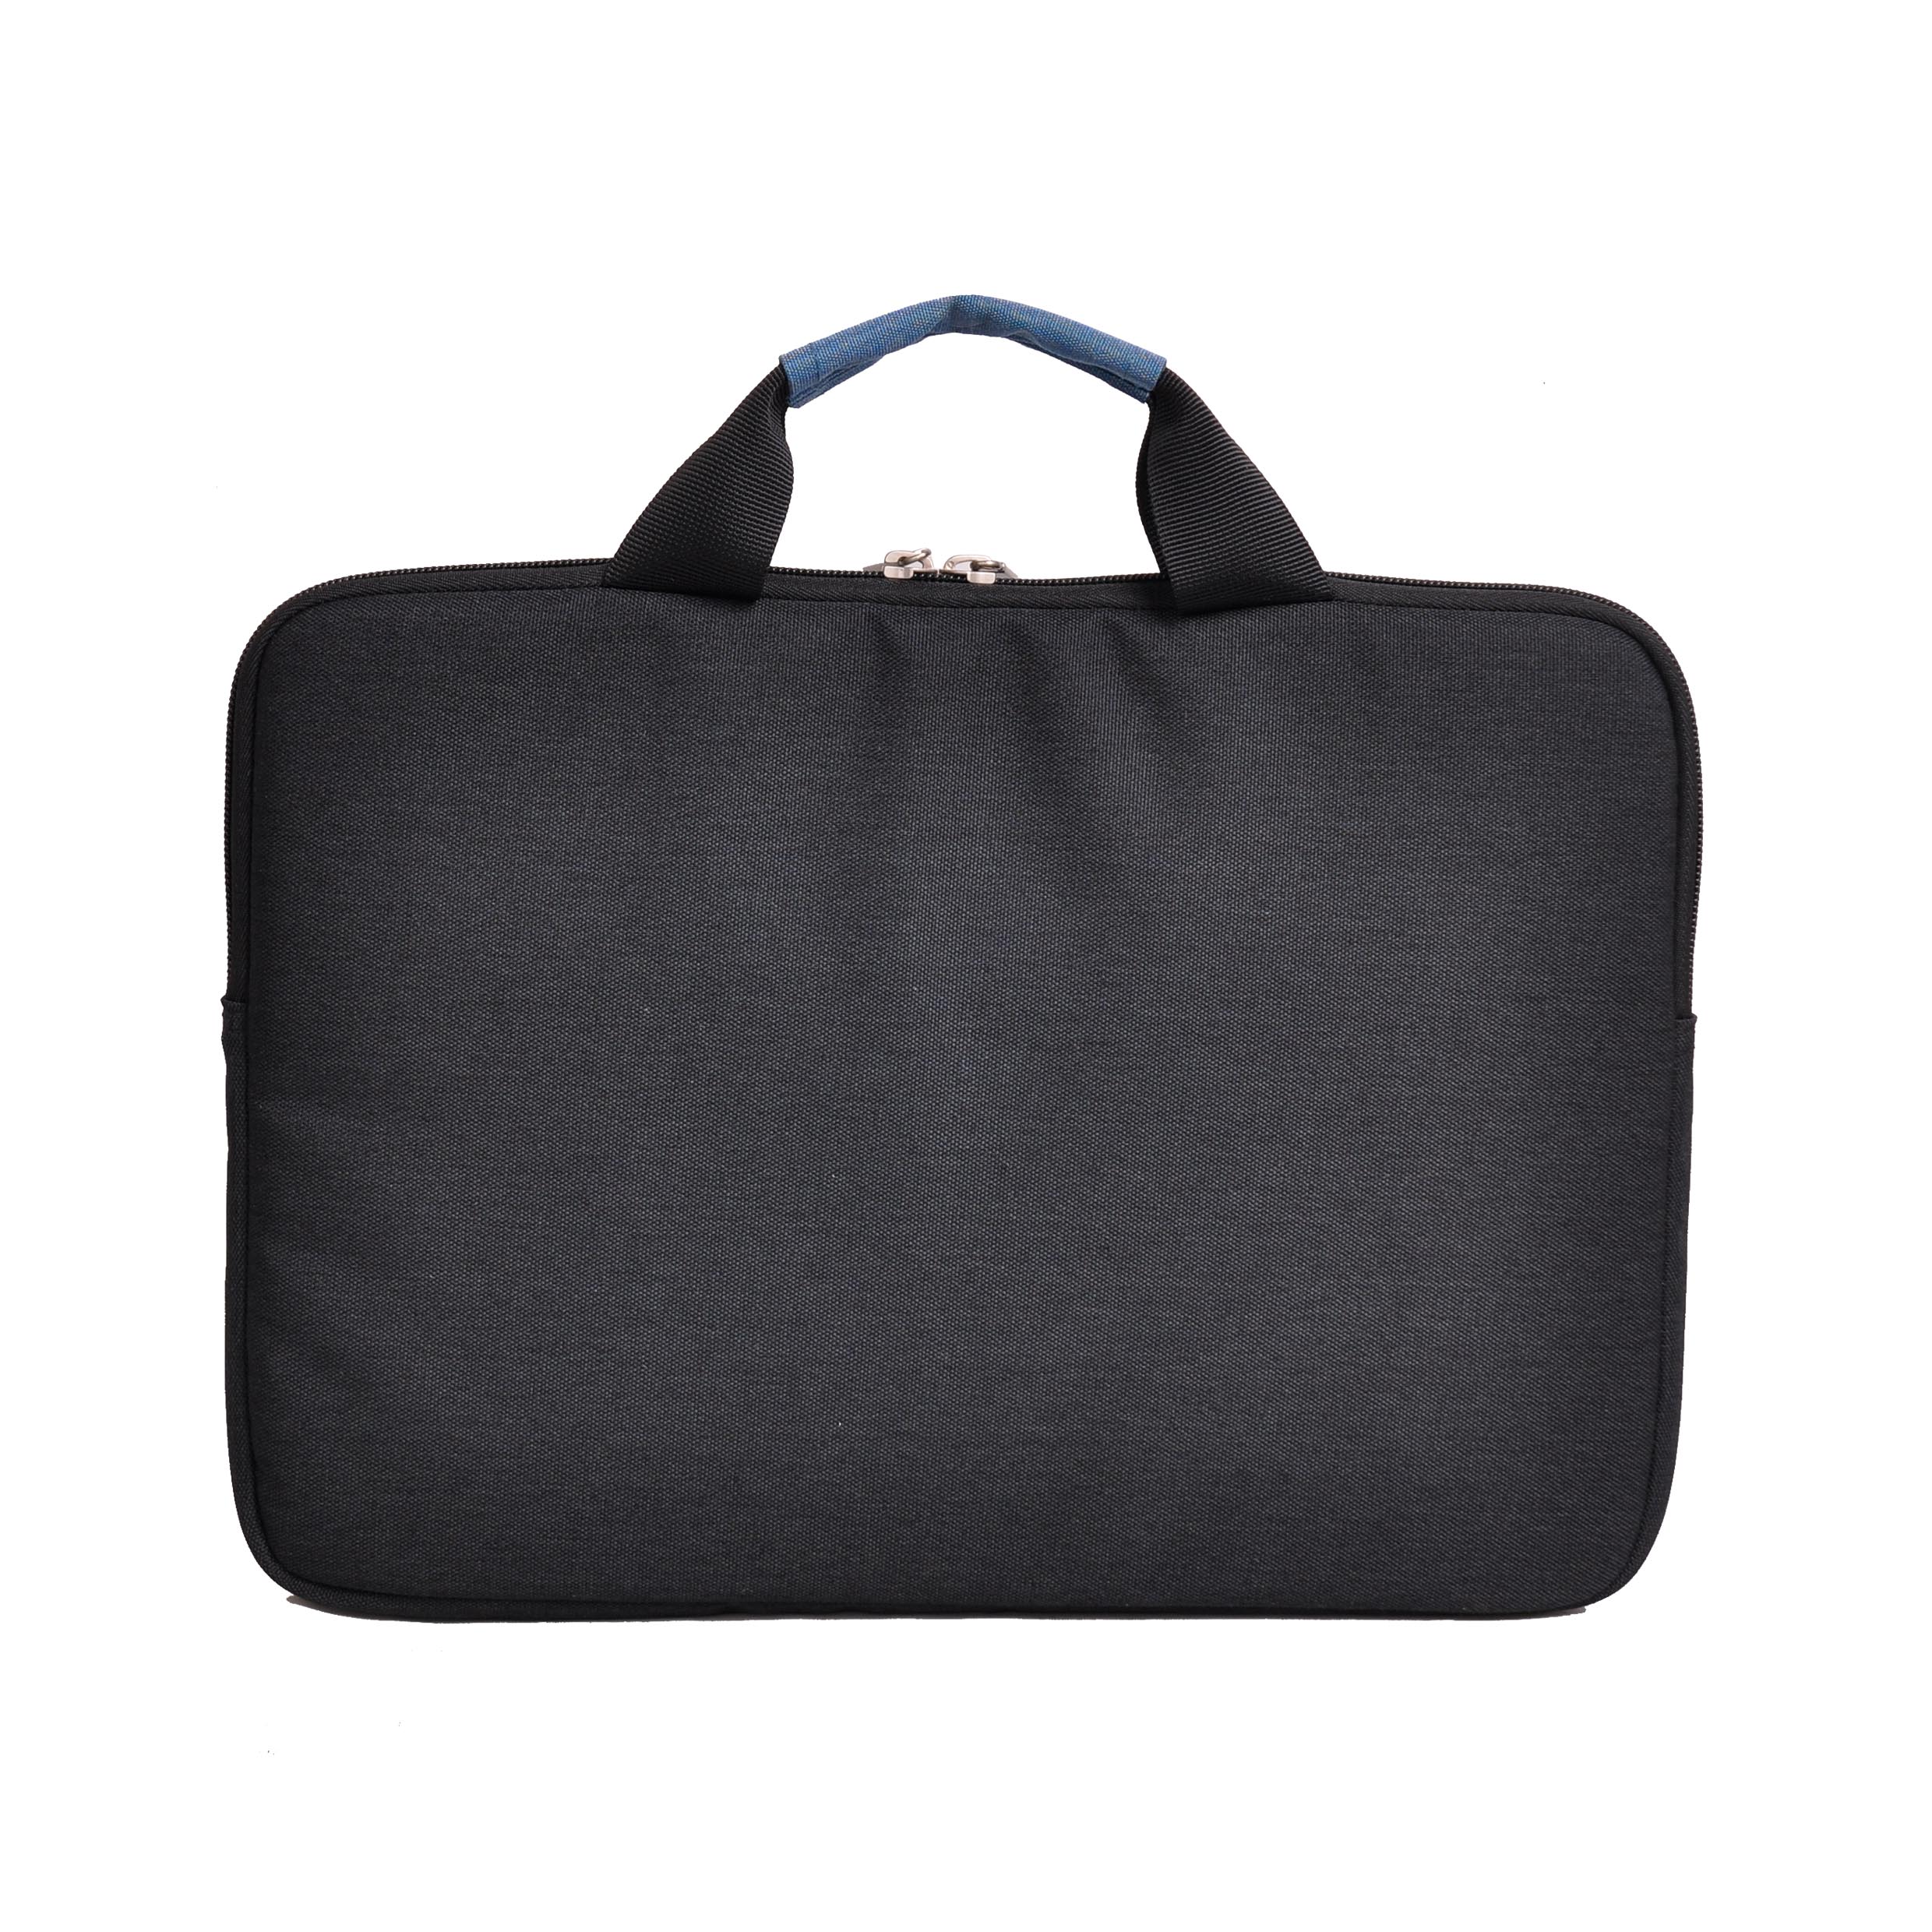 15.6 inch best laptop carrying bags